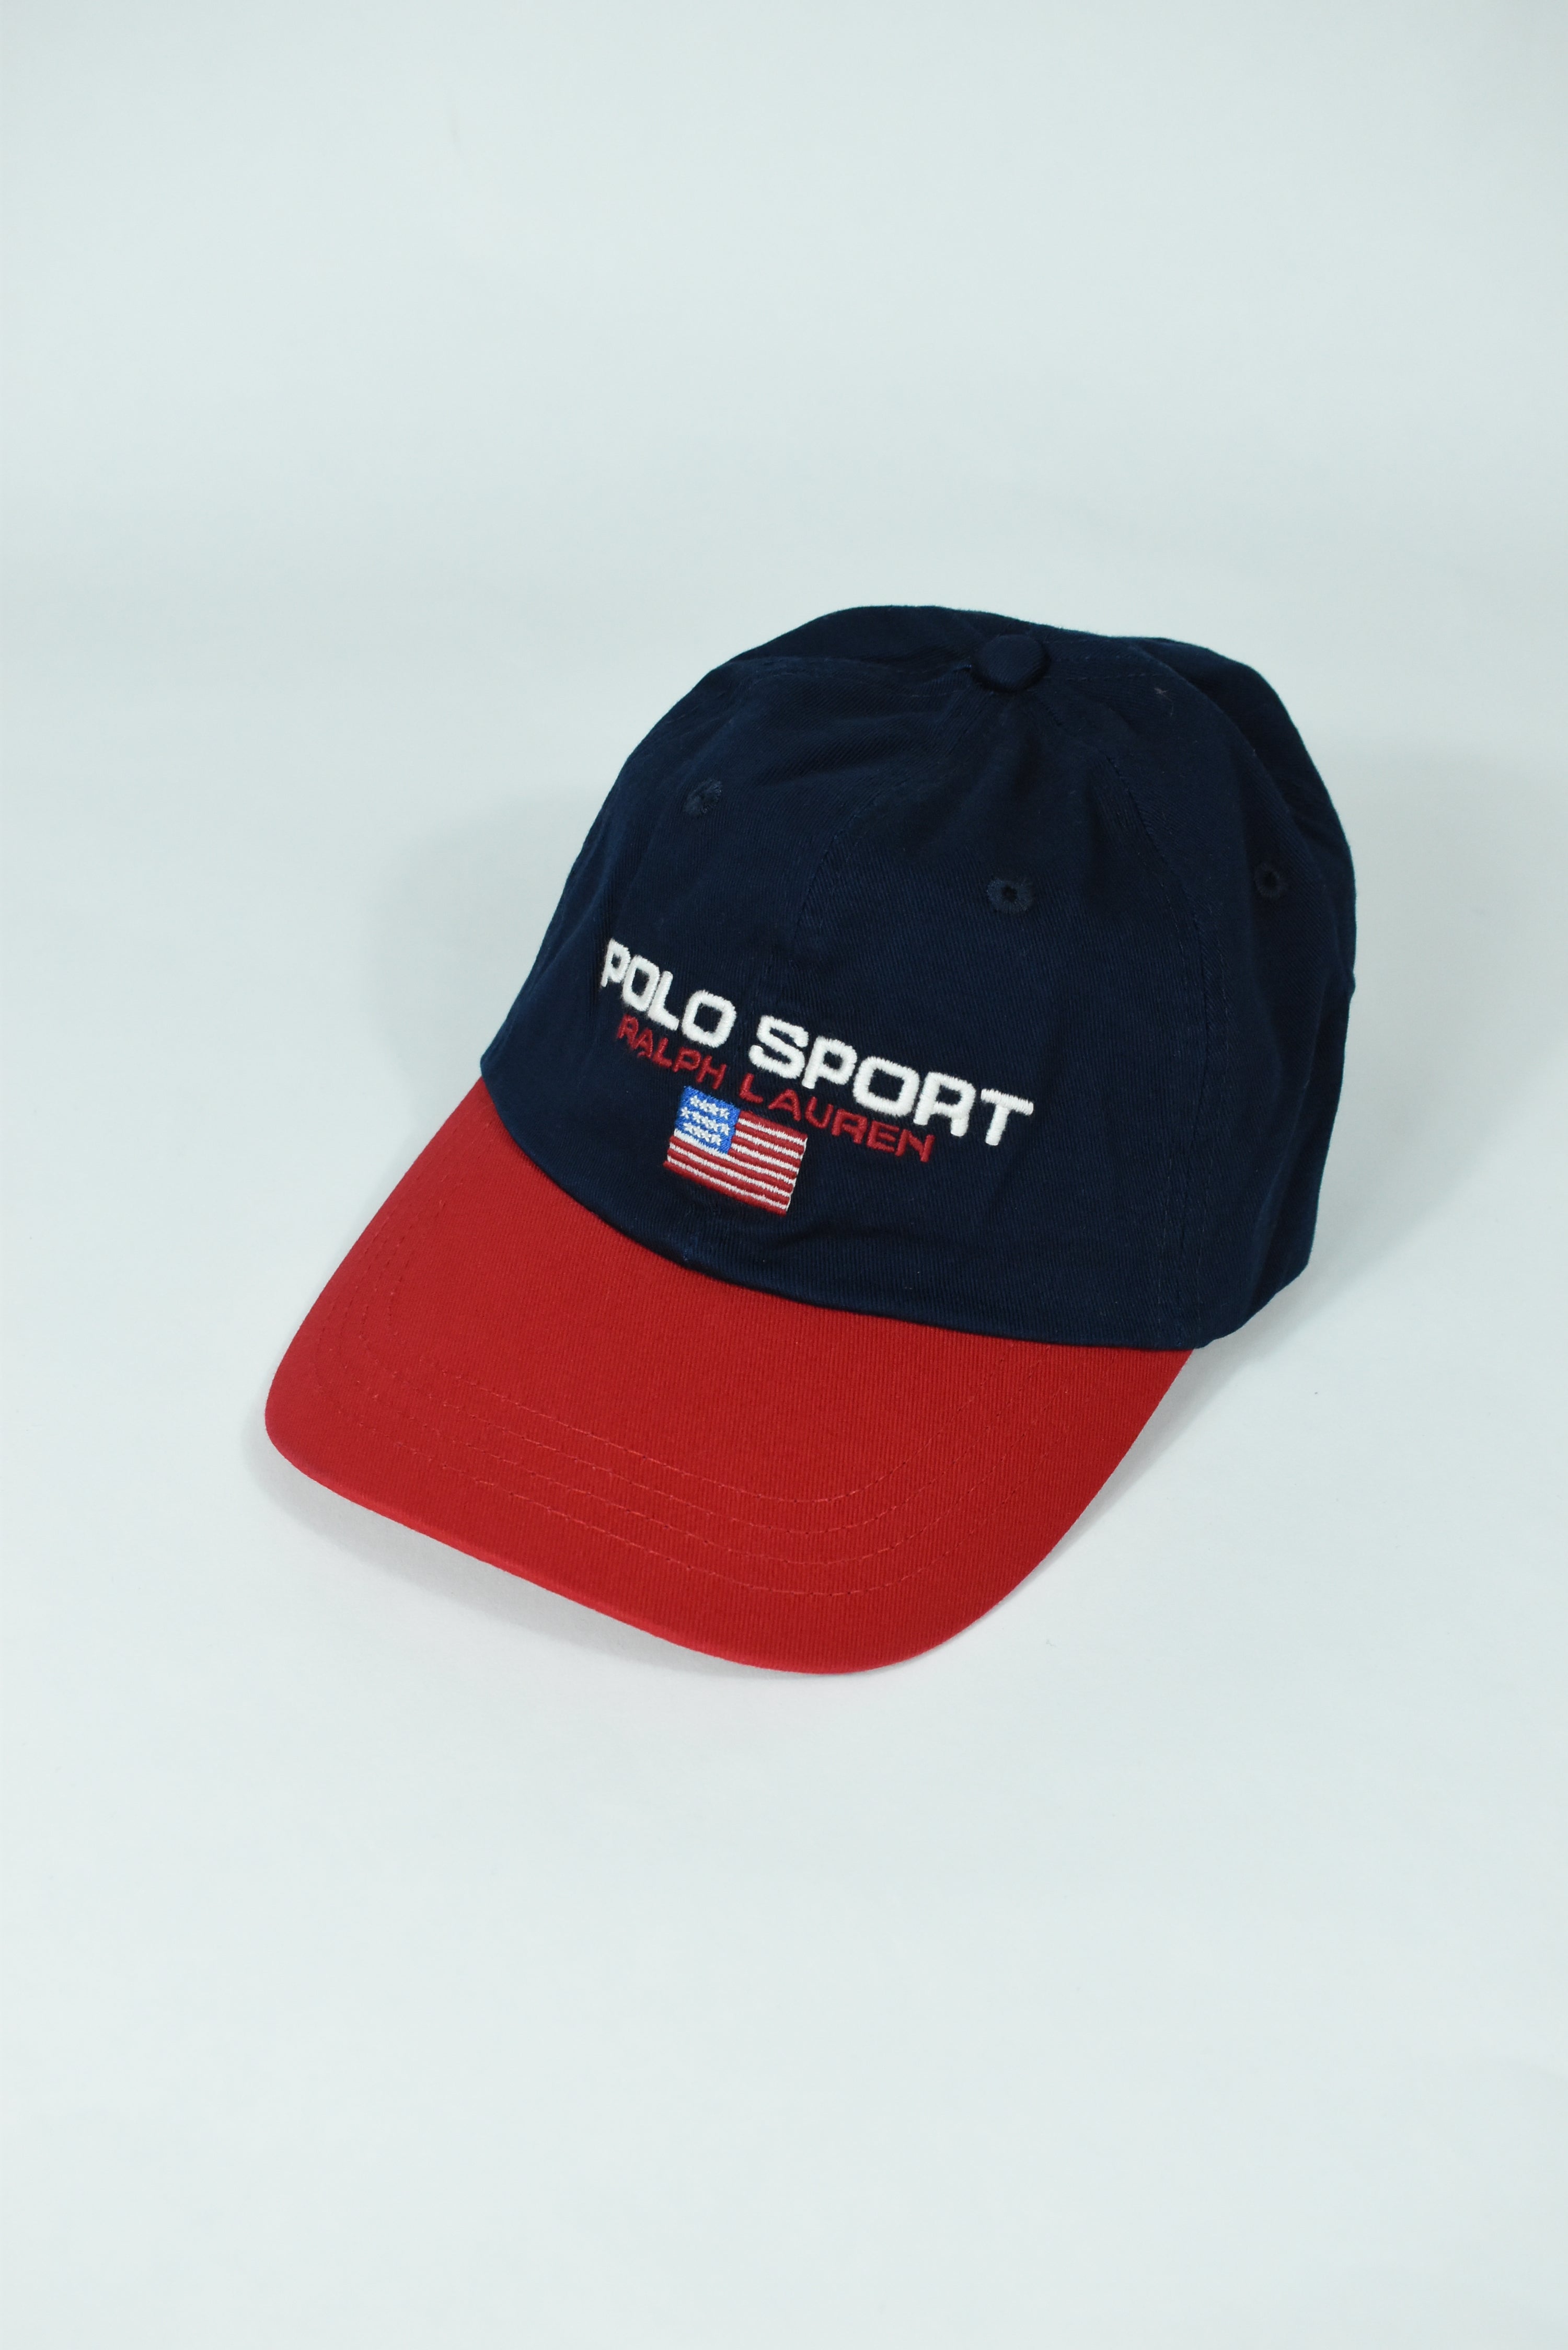 New Navy/Red RL Polo Sport Embroidery Cap